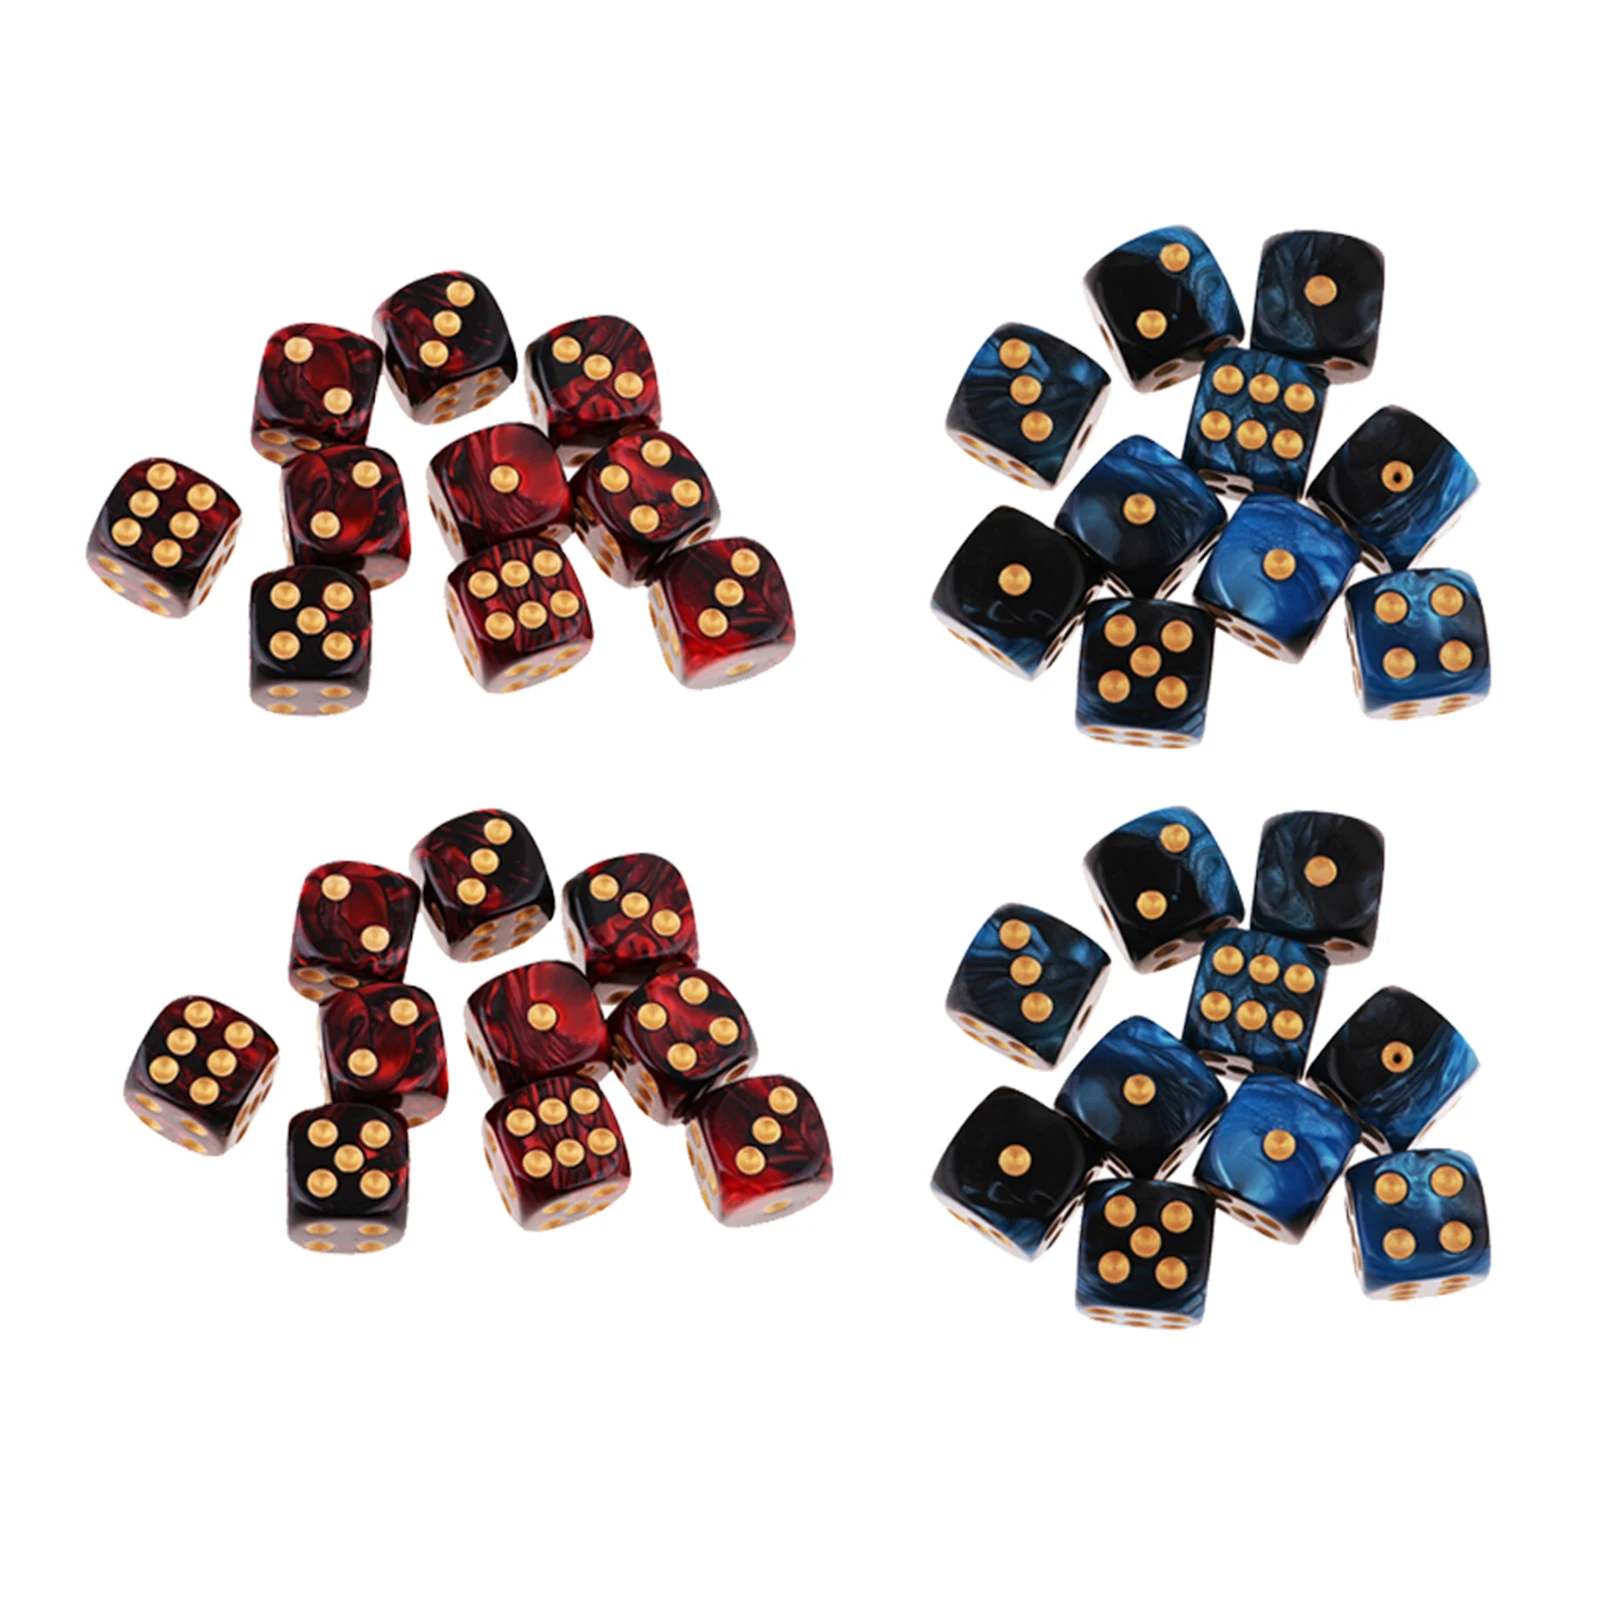 20 pack of 6-sided Game Dice 16mm Dice for Board Games and Teaching Math 